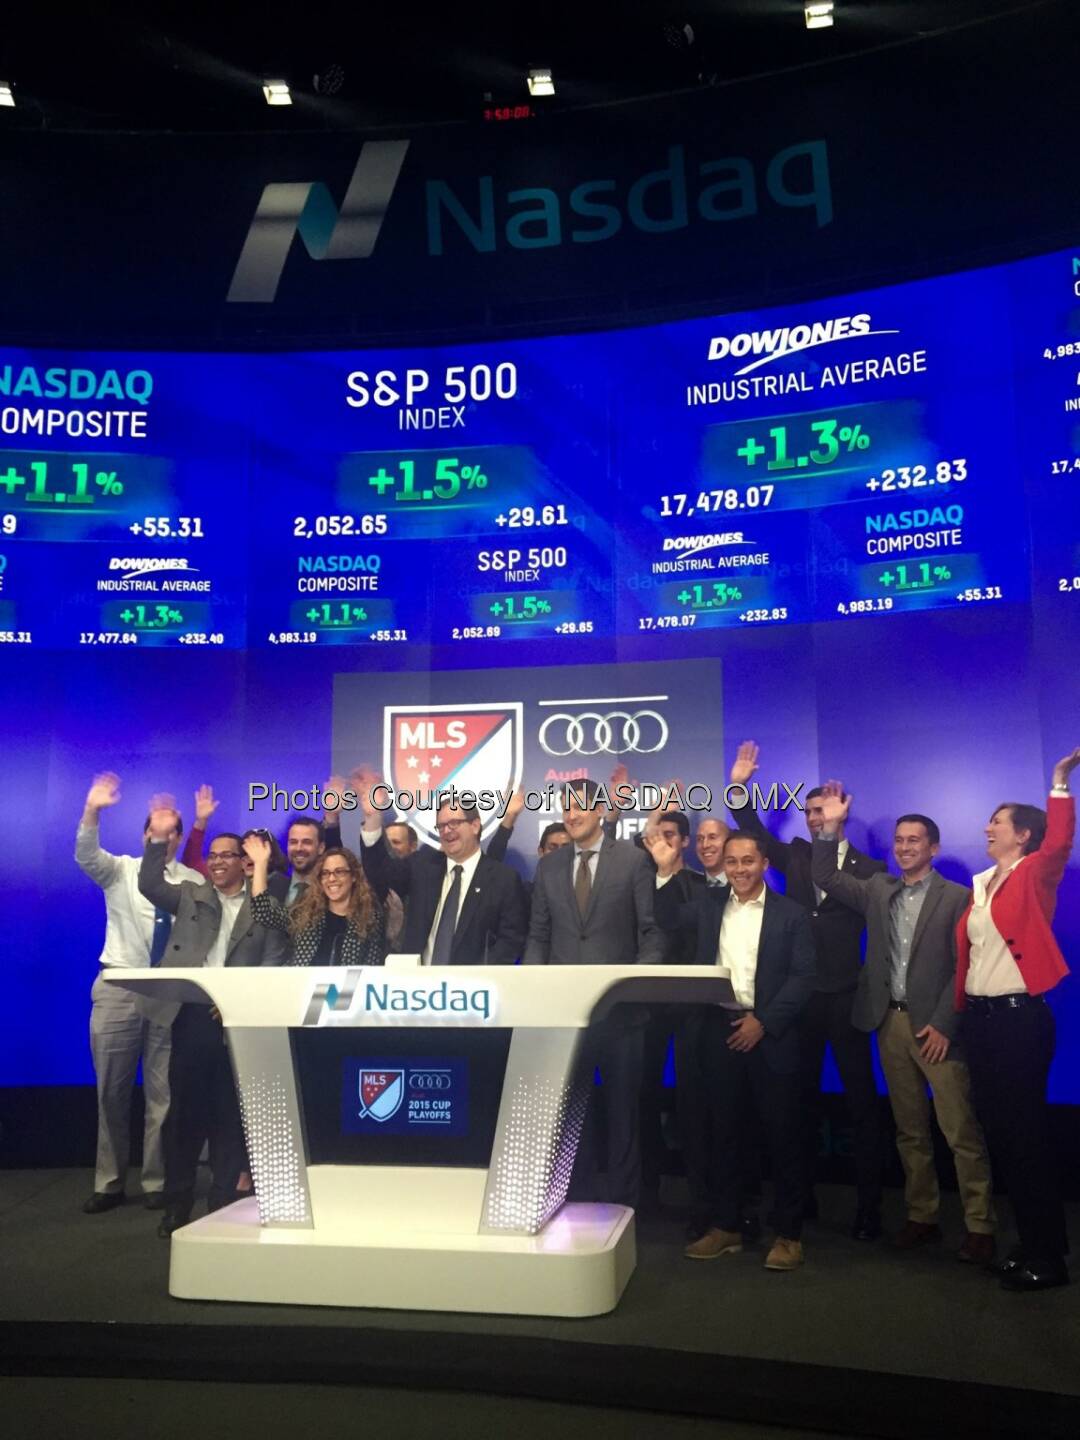 Great to have @MLS here to ring the #Nasdaq closing bell! #MLSCupPlayoffs  Source: http://facebook.com/NASDAQ